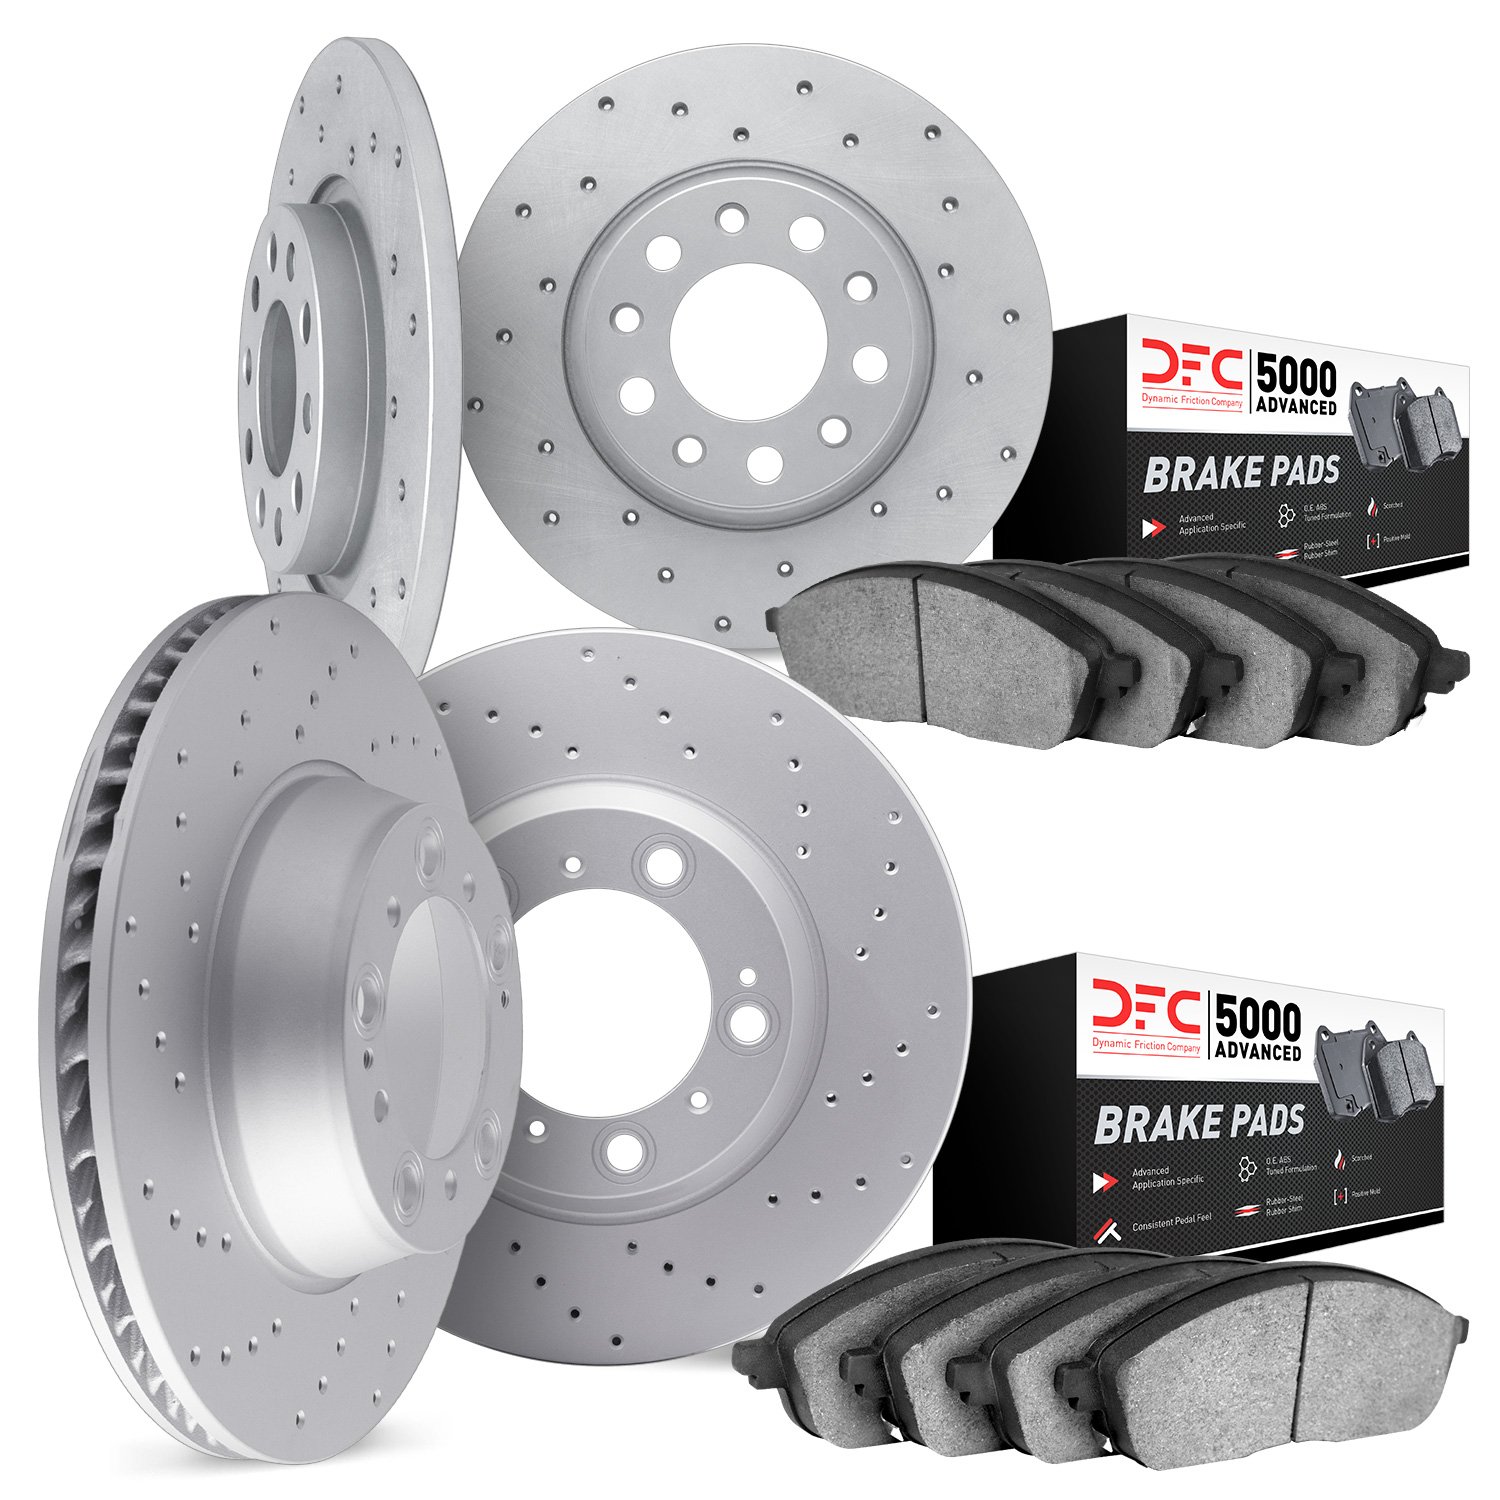 2704-27007 Geoperformance Drilled Brake Rotors with Active Performance Pads Kit, 2004-2013 Volvo, Position: Front and Rear